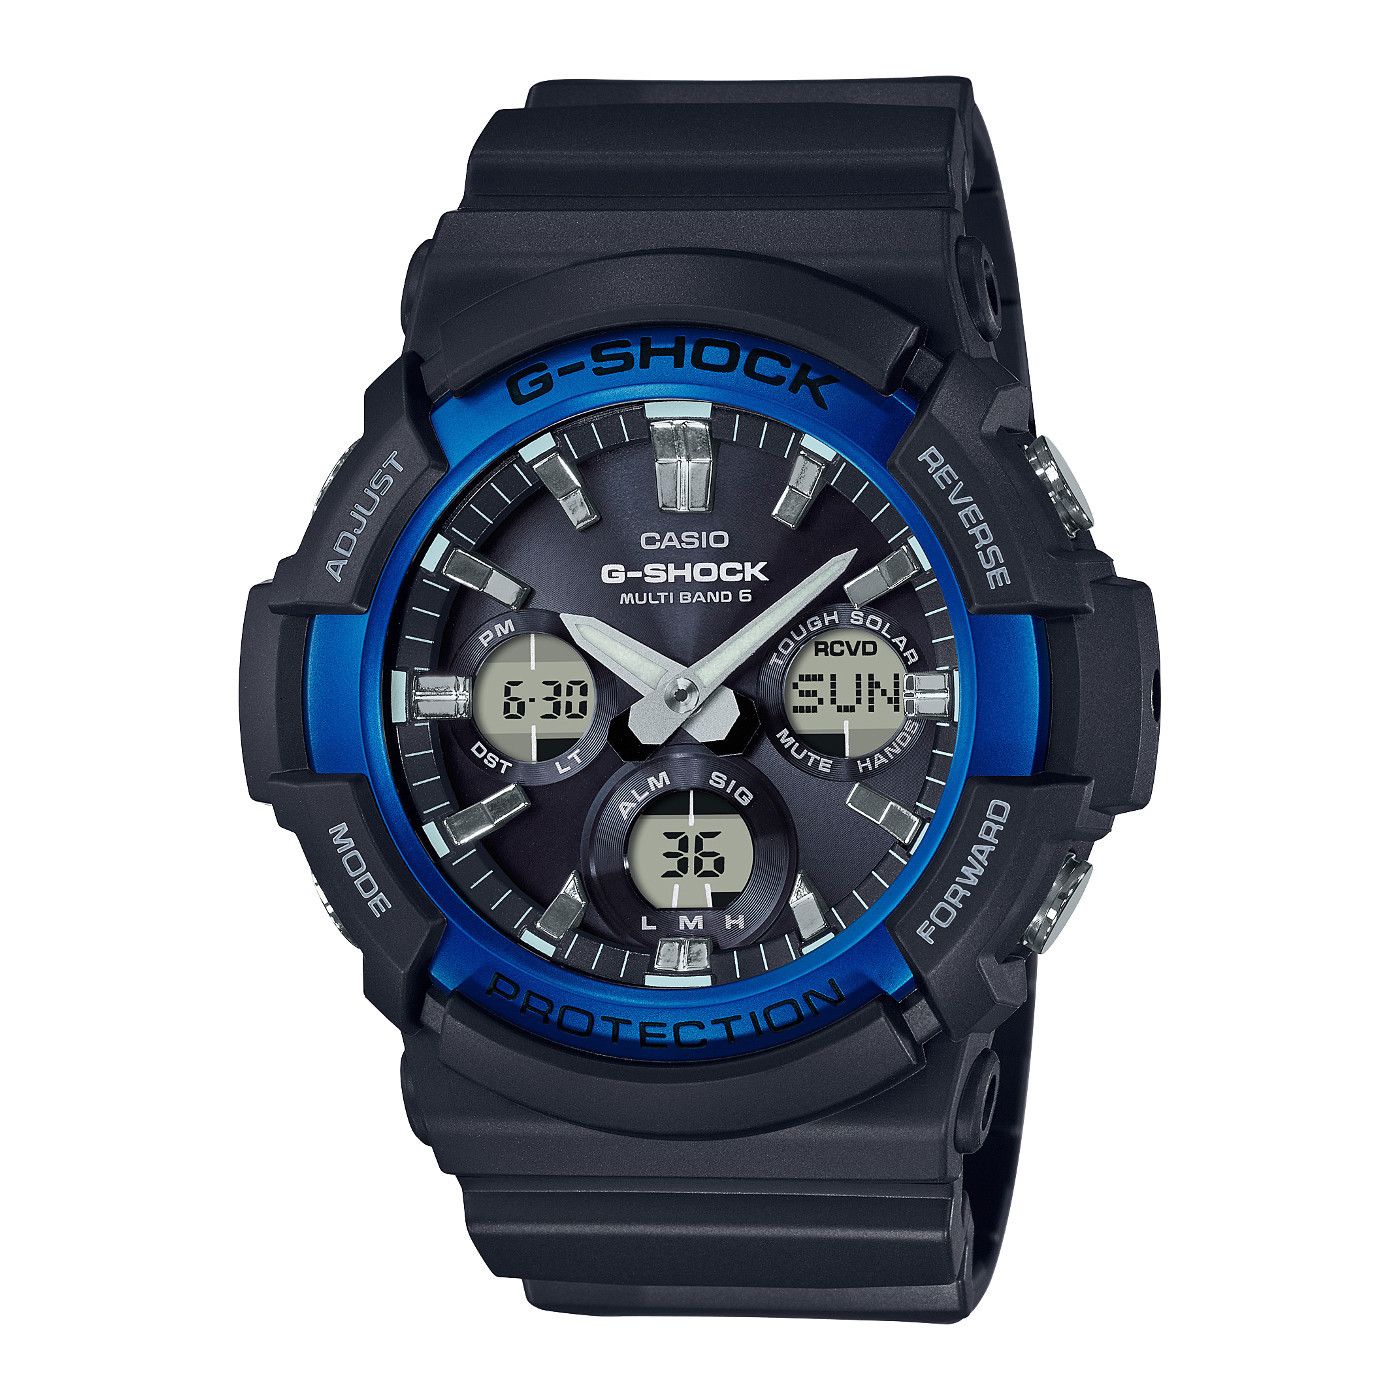 This Casio G-shock Analogue-Digital Watch for Men is the perfect timepiece to wear or to gift. It's Black 53 mm Round case combined with the comfortable Black Plastic will ensure you enjoy this stunning timepiece without any compromise. Operated by a high quality Quartz movement and water resistant to 20 bars, your watch will keep ticking. Fashionable Sporty Design, Perfect for all kind of sports, indoor and outdoor activities or daily use -The watch has a calendar function: Day-Date-Month, Solar, Radio Controlled, Worldtime, Stopwatch, Alarm High quality 22 cm length and 24 mm width Black Plastic strap with a Buckle Case diameter: 53 mm,case thickness:  mm, case colour: Black and dial colour: Black